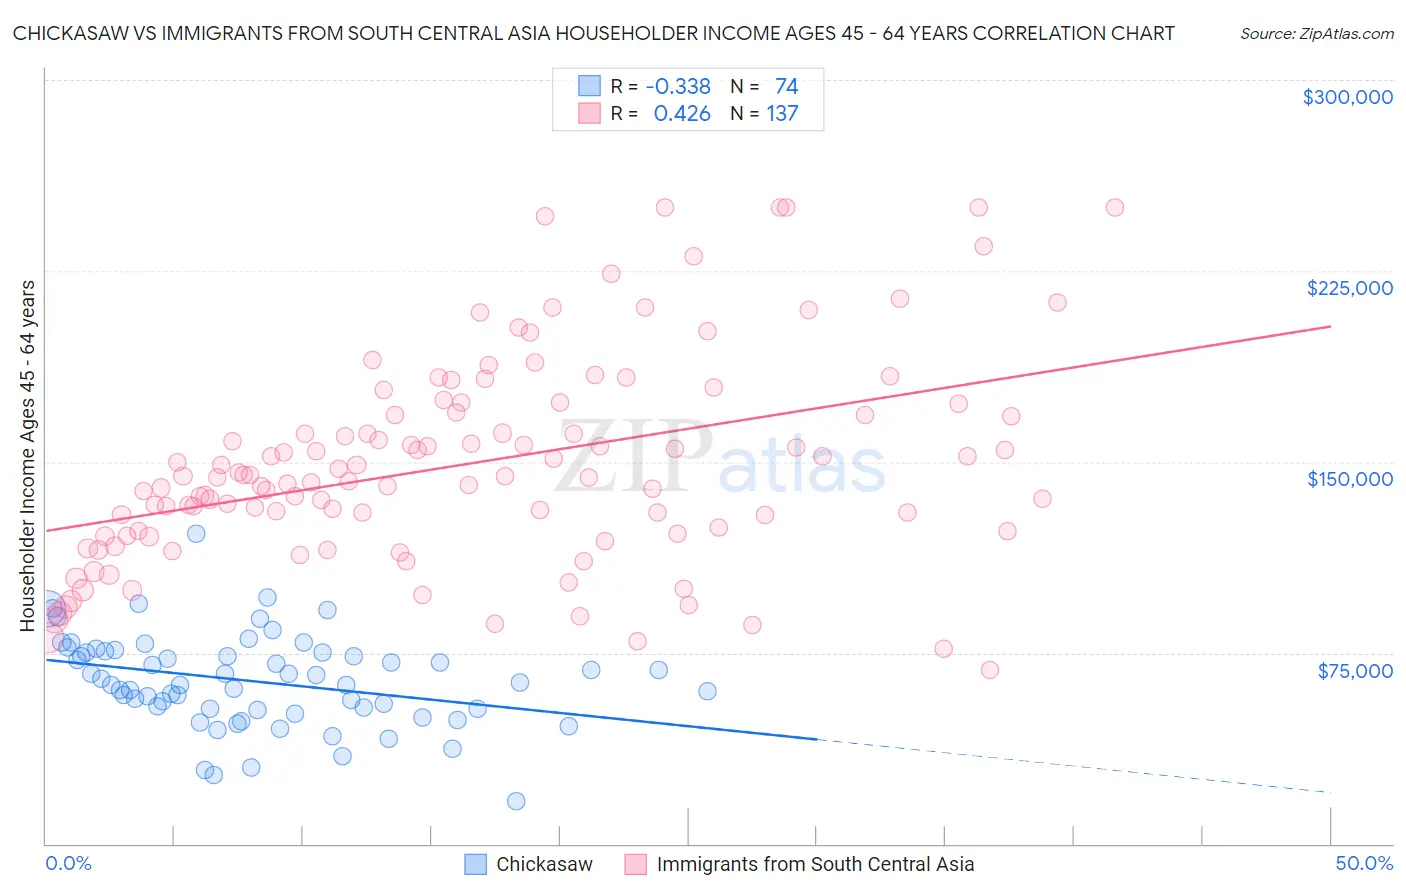 Chickasaw vs Immigrants from South Central Asia Householder Income Ages 45 - 64 years